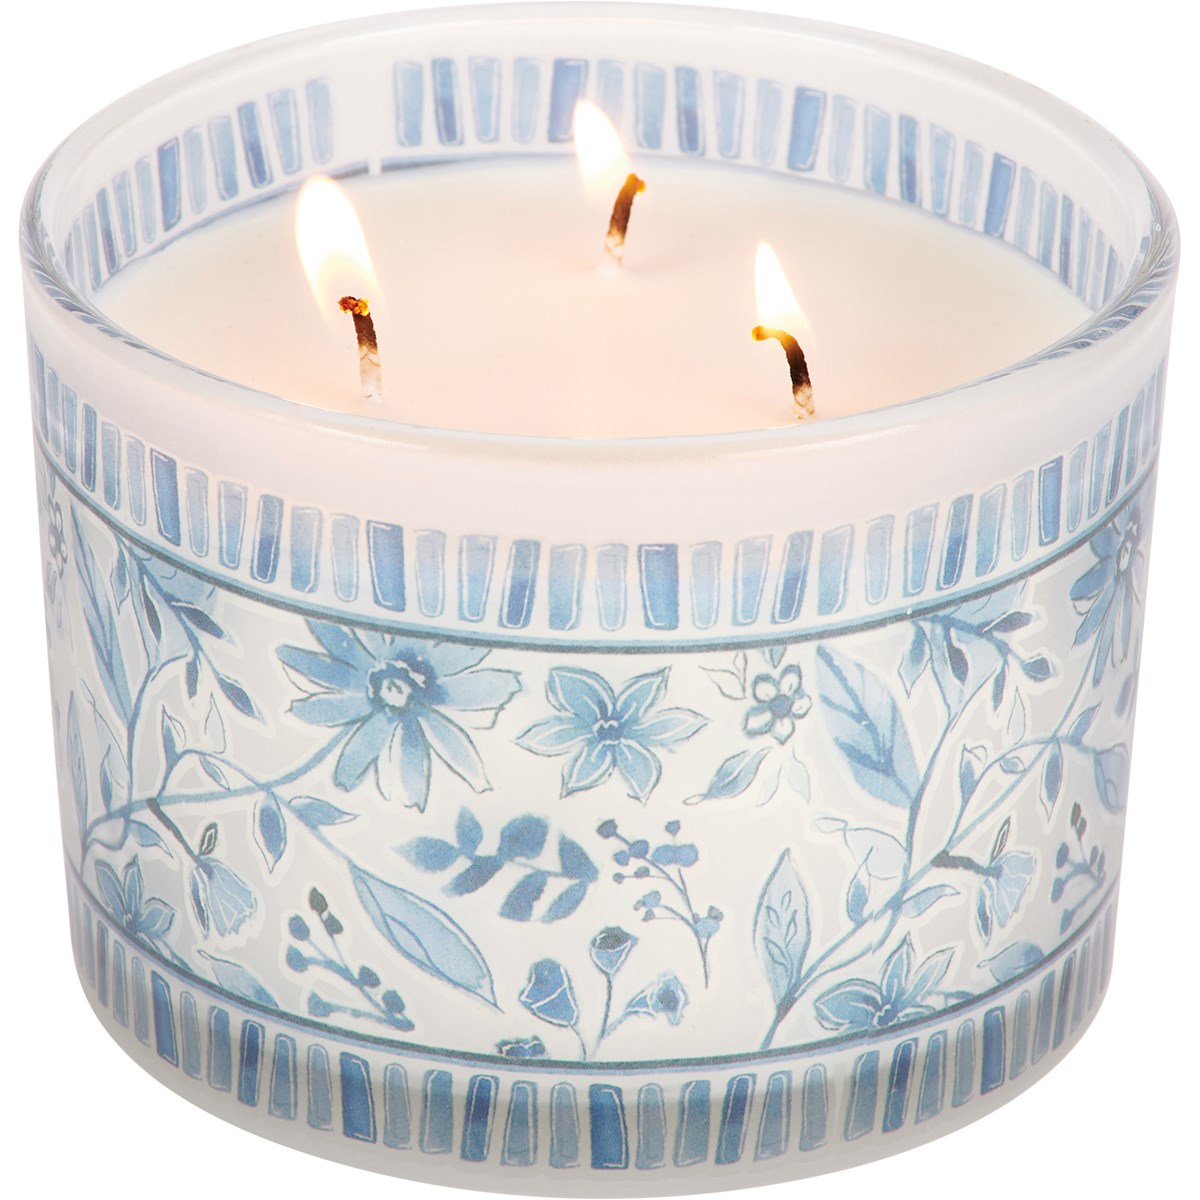 Blue Florals Candle - Soy Wax, Glass, Cotton